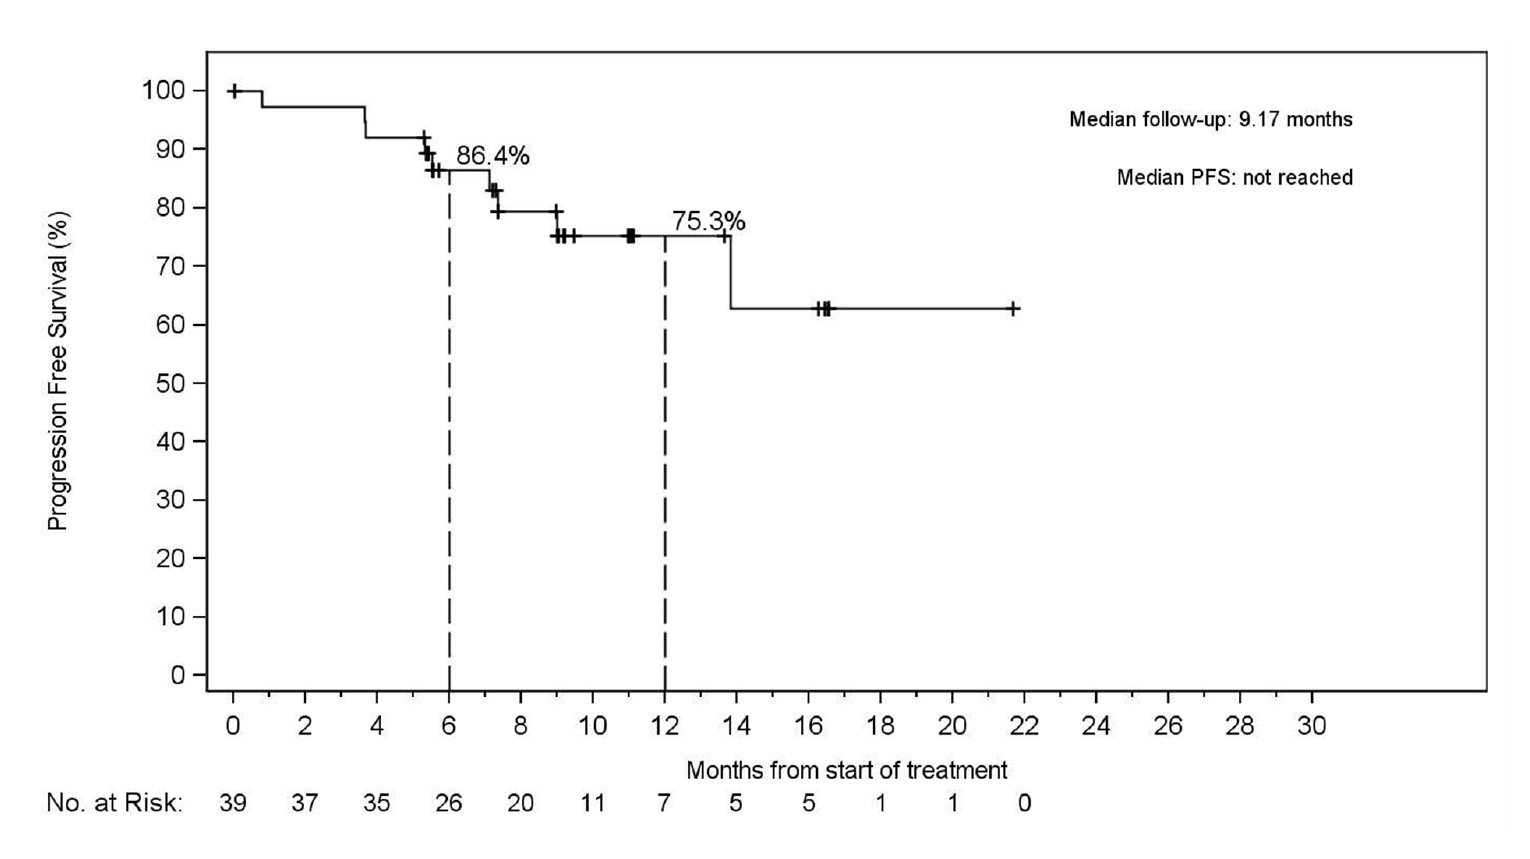 In this Kaplan–Meier plot of progression-free survival (PFS) in the treatment-naïve RET fusion-positive non–small cell lung cancer population based on the independent radiographic committee assessment, the number of at-risk patients receiving selpercatinib at 0, 2, 4, 6, 8, 12, 14, 16, 18, 20, and 22 months was 39, 37, 35, 26, 20, 11, 7, 5, 5, 1, 1, and 0, respectively. The median PFS was not reached.